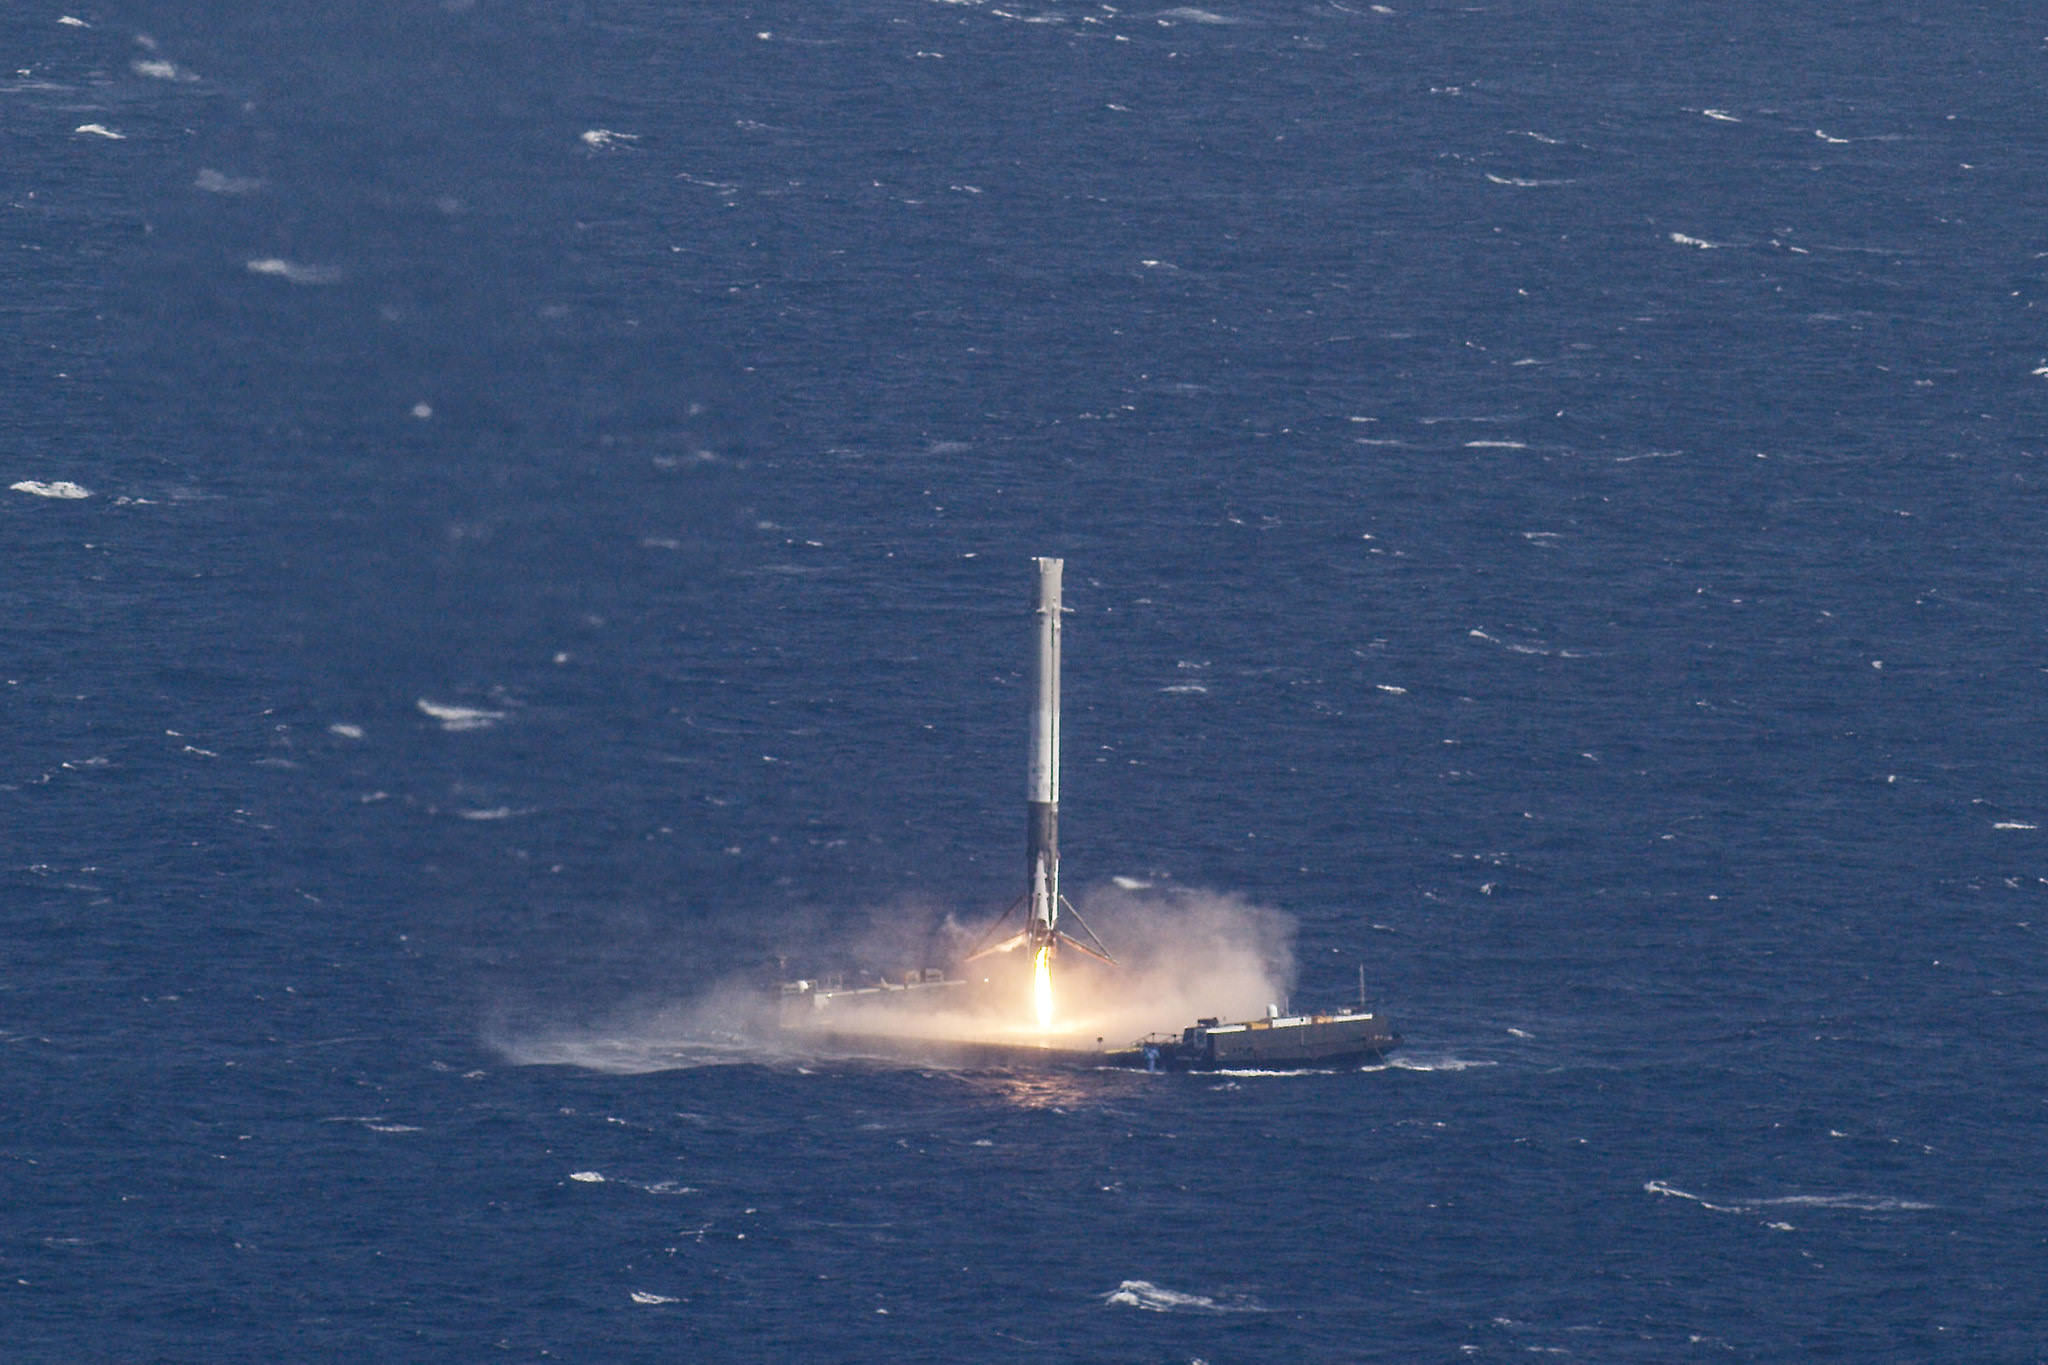 SpaceX Falcon 9 booster successfully lands on droneship after blastoff on Dragon CRS-8 mission to ISS for NASA on April 8, 2016.  Credit: SpaceX